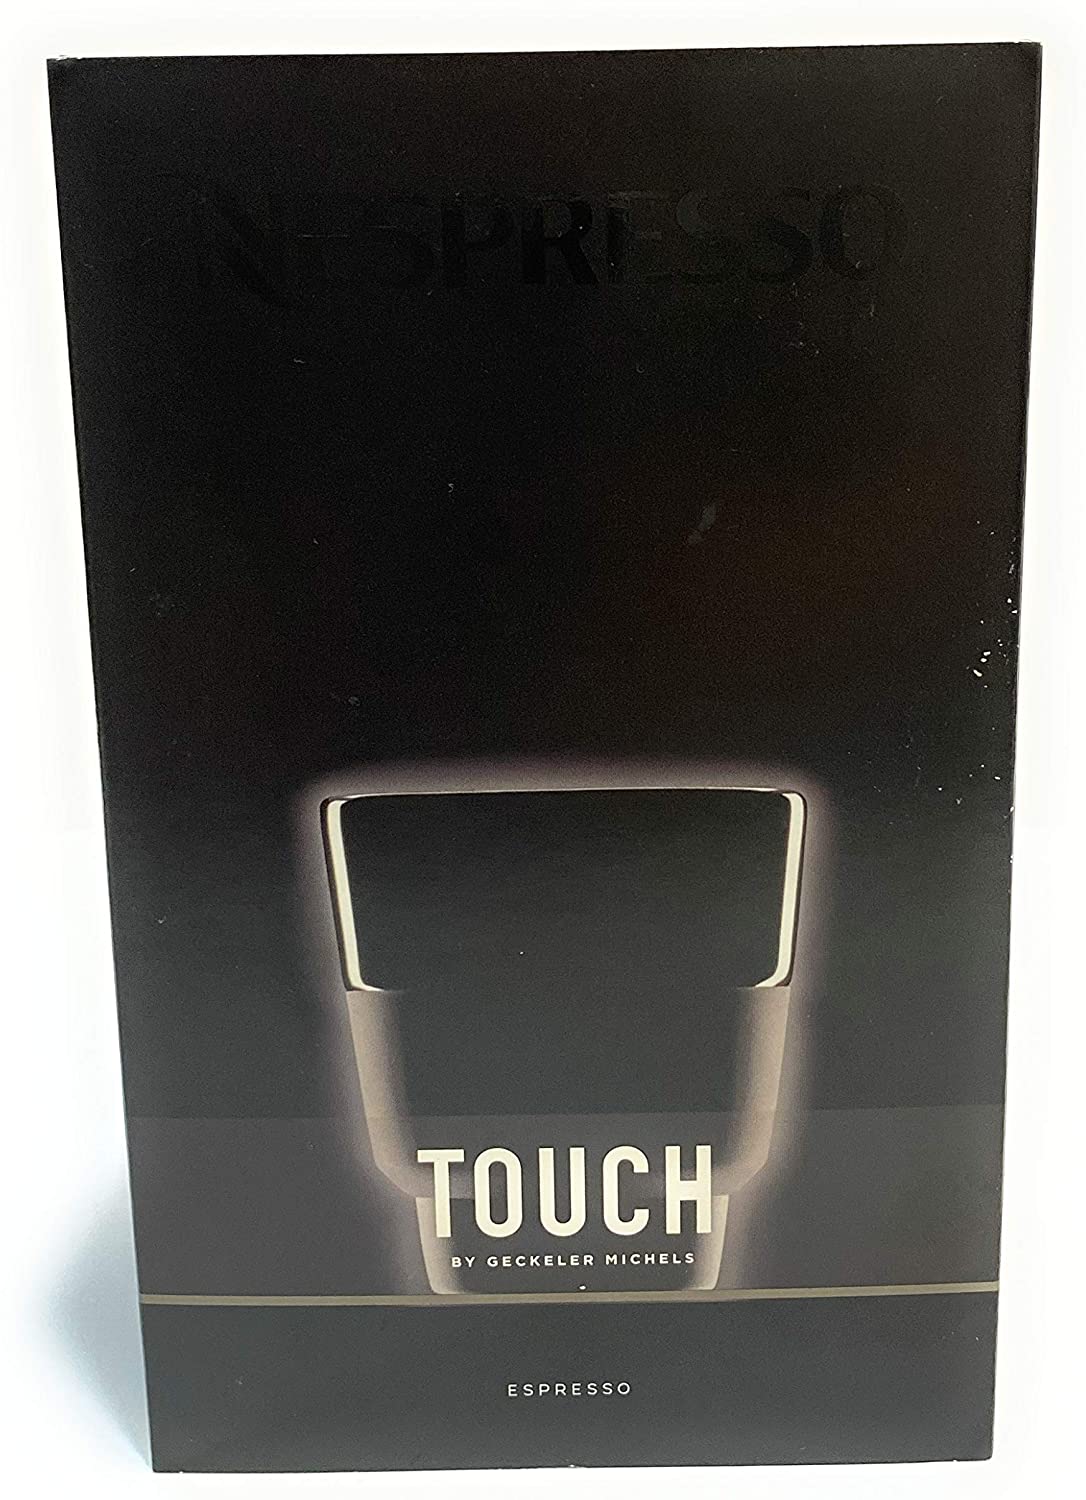 Nespresso 2 Touch Espresso Coffee Cup 80 ml – Black Porcelain and Soft Touch Silicone, in Brand Box, by Berlin Design Studio Geckeler MICHELS, New